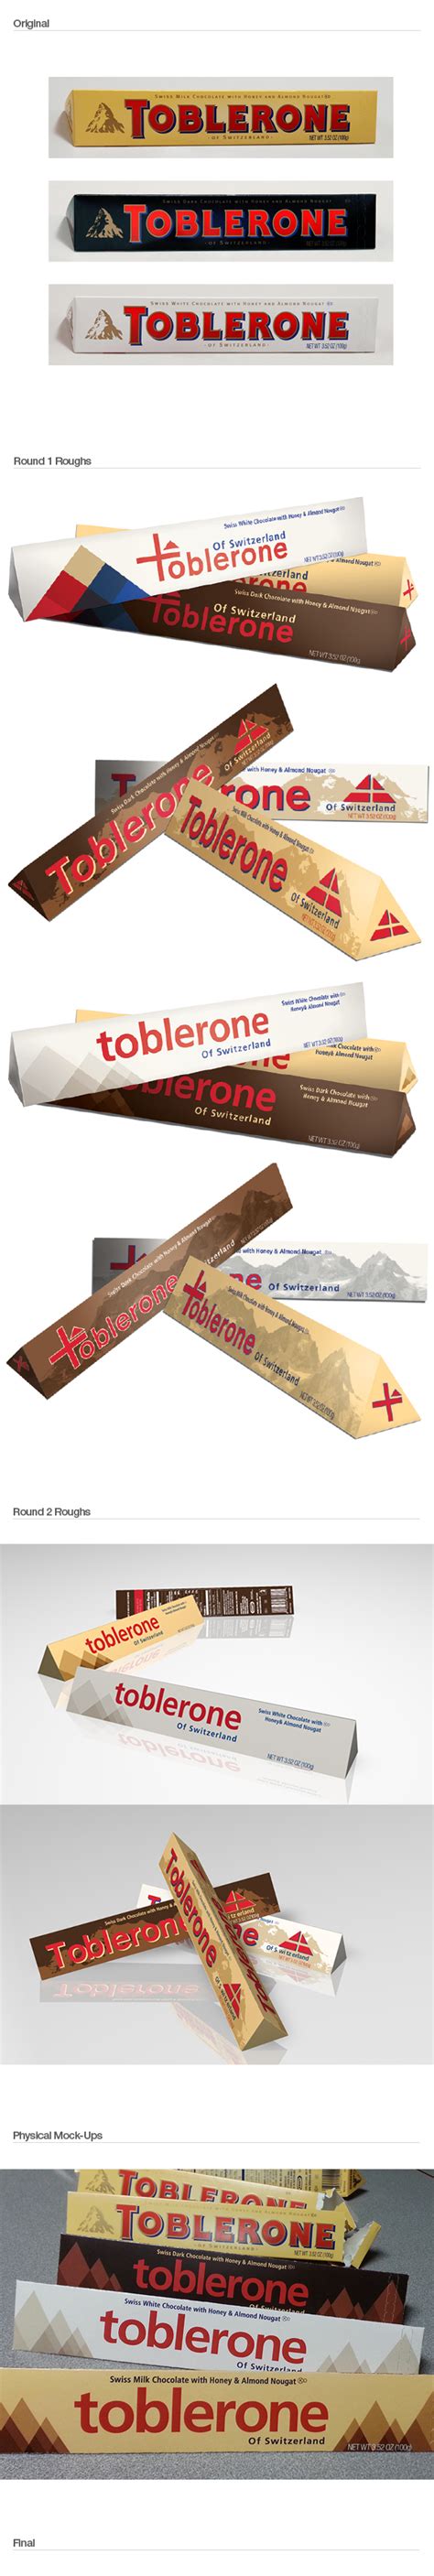 Toblerone Chocolate Has A Rich History Dating Back To 1908 When Theodor